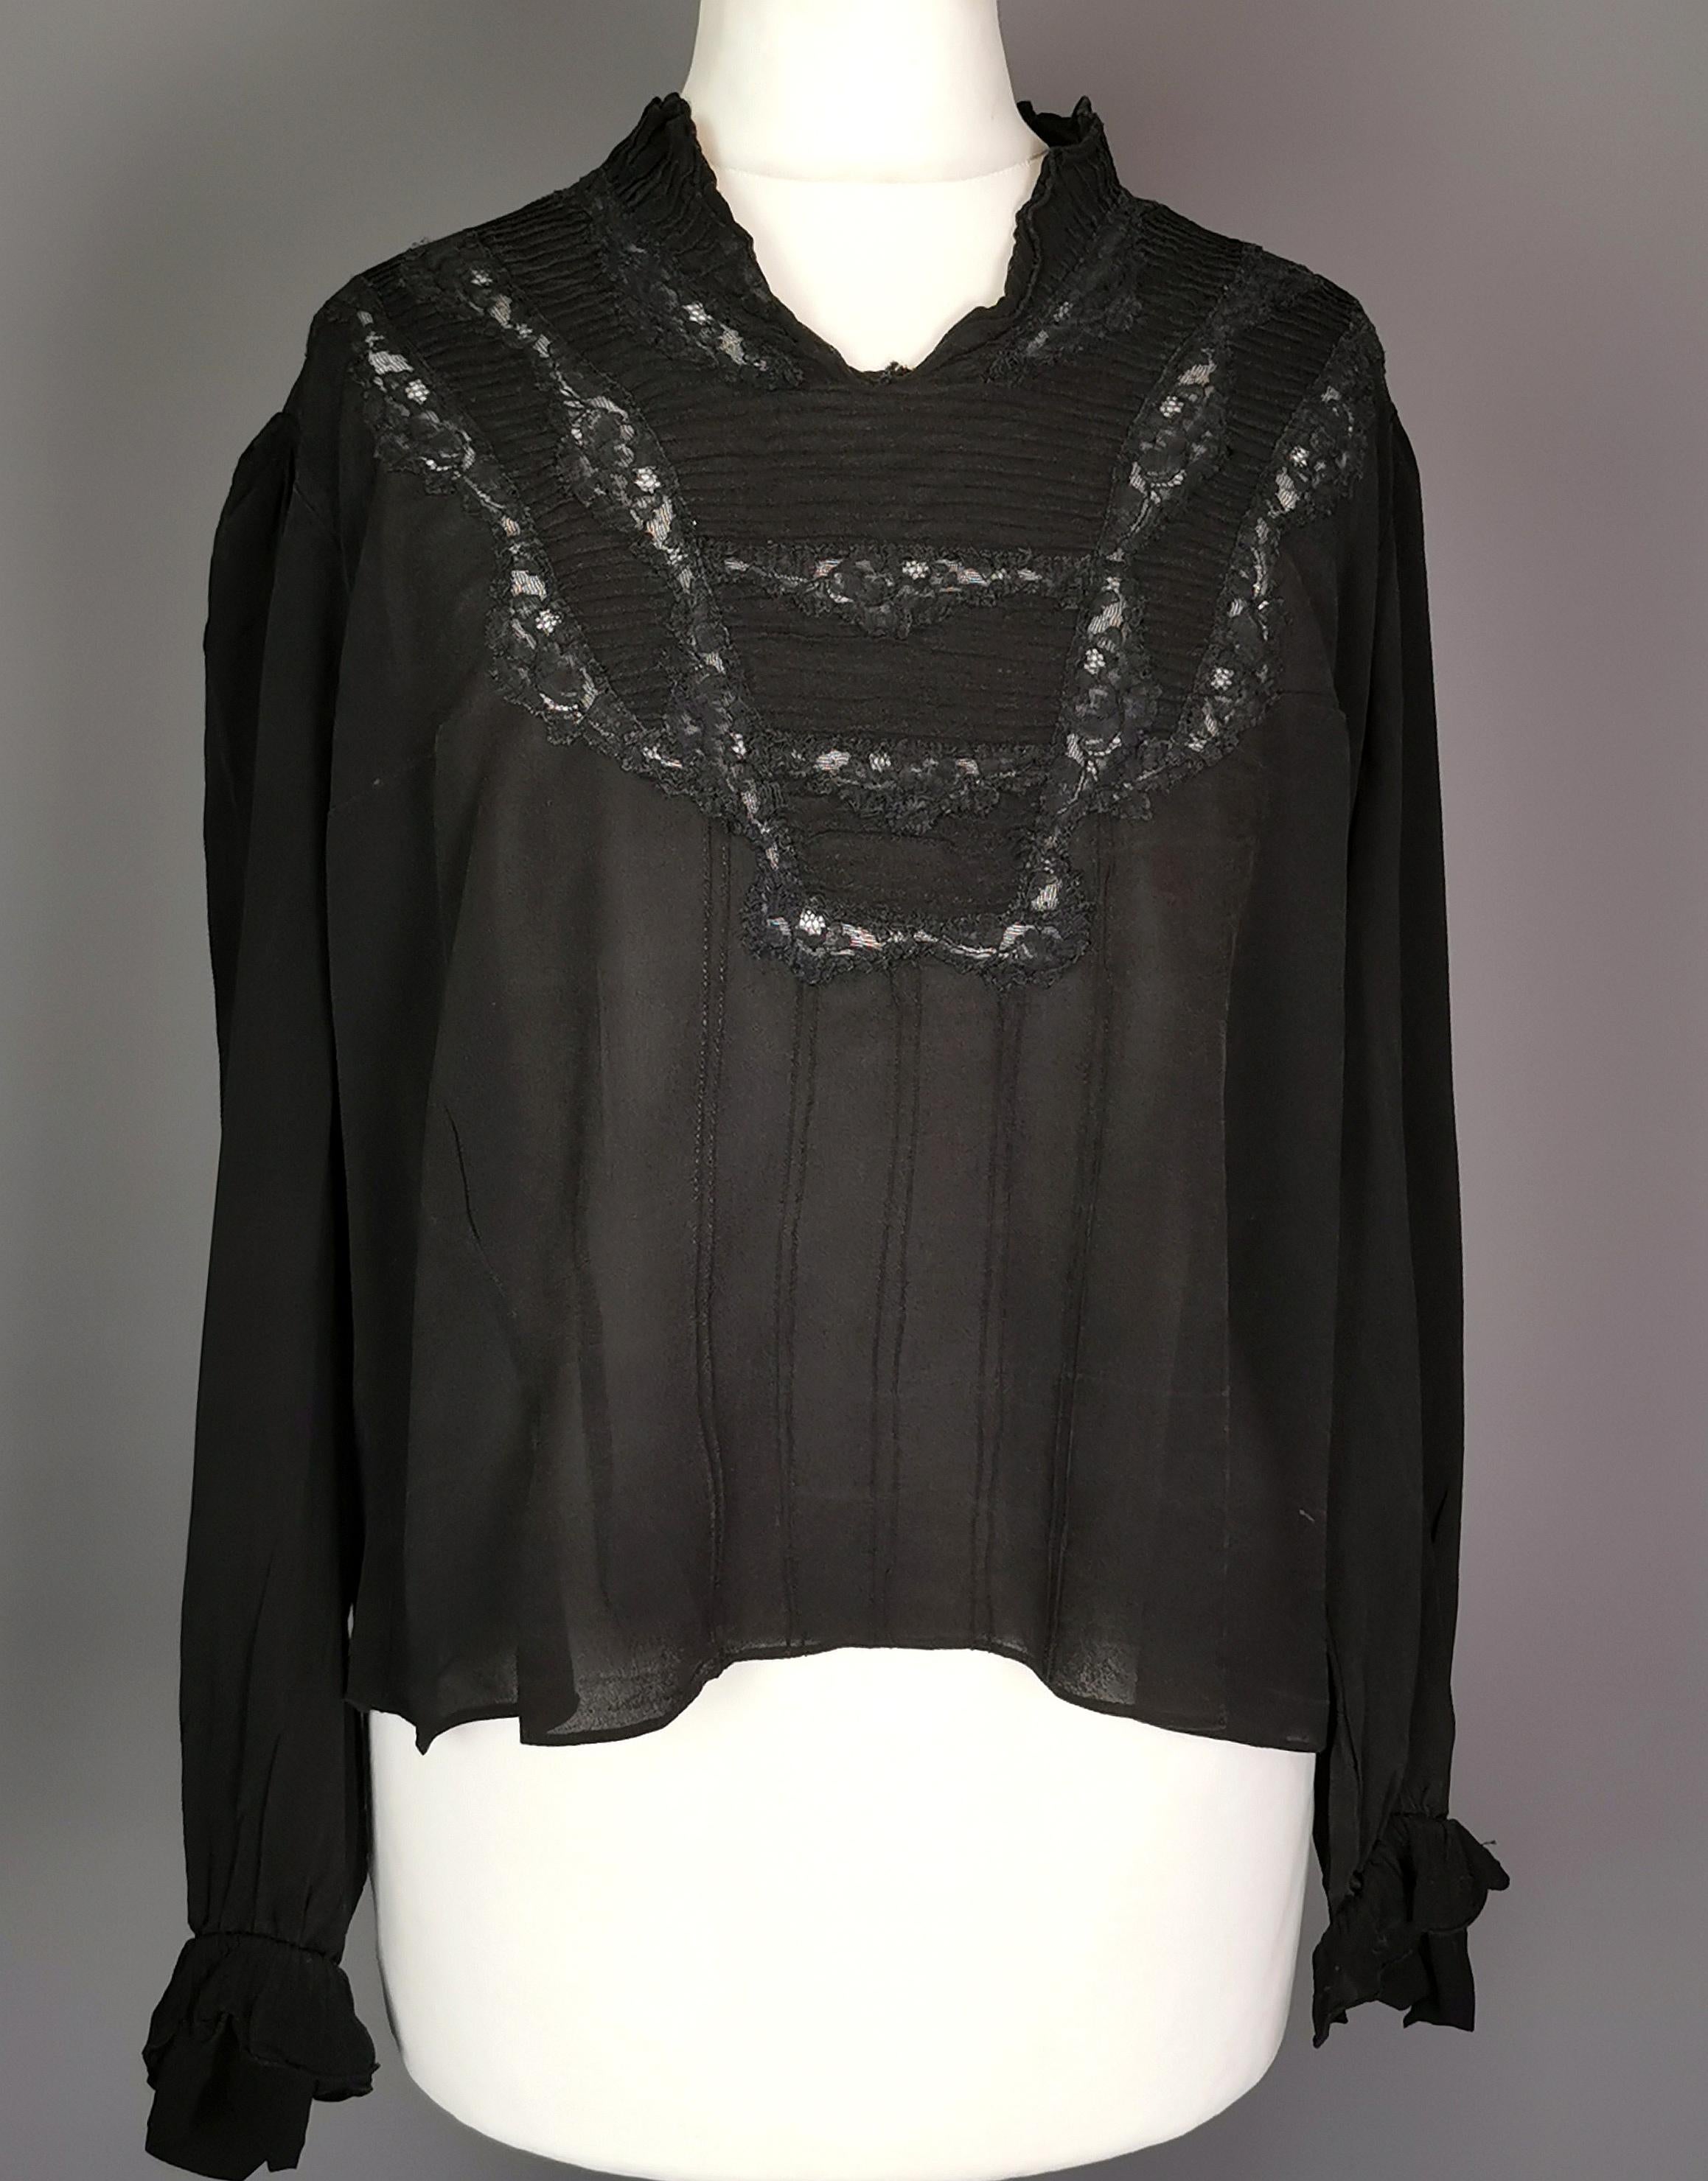 A stunning late Edwardian era black chiffon blouse.

It has a pretty cut out lace covered pattern to the front of the dress with darts down the front and pleat detailing.

The blouse has long sleeves with silk button ruffle cuffs.

The collar is